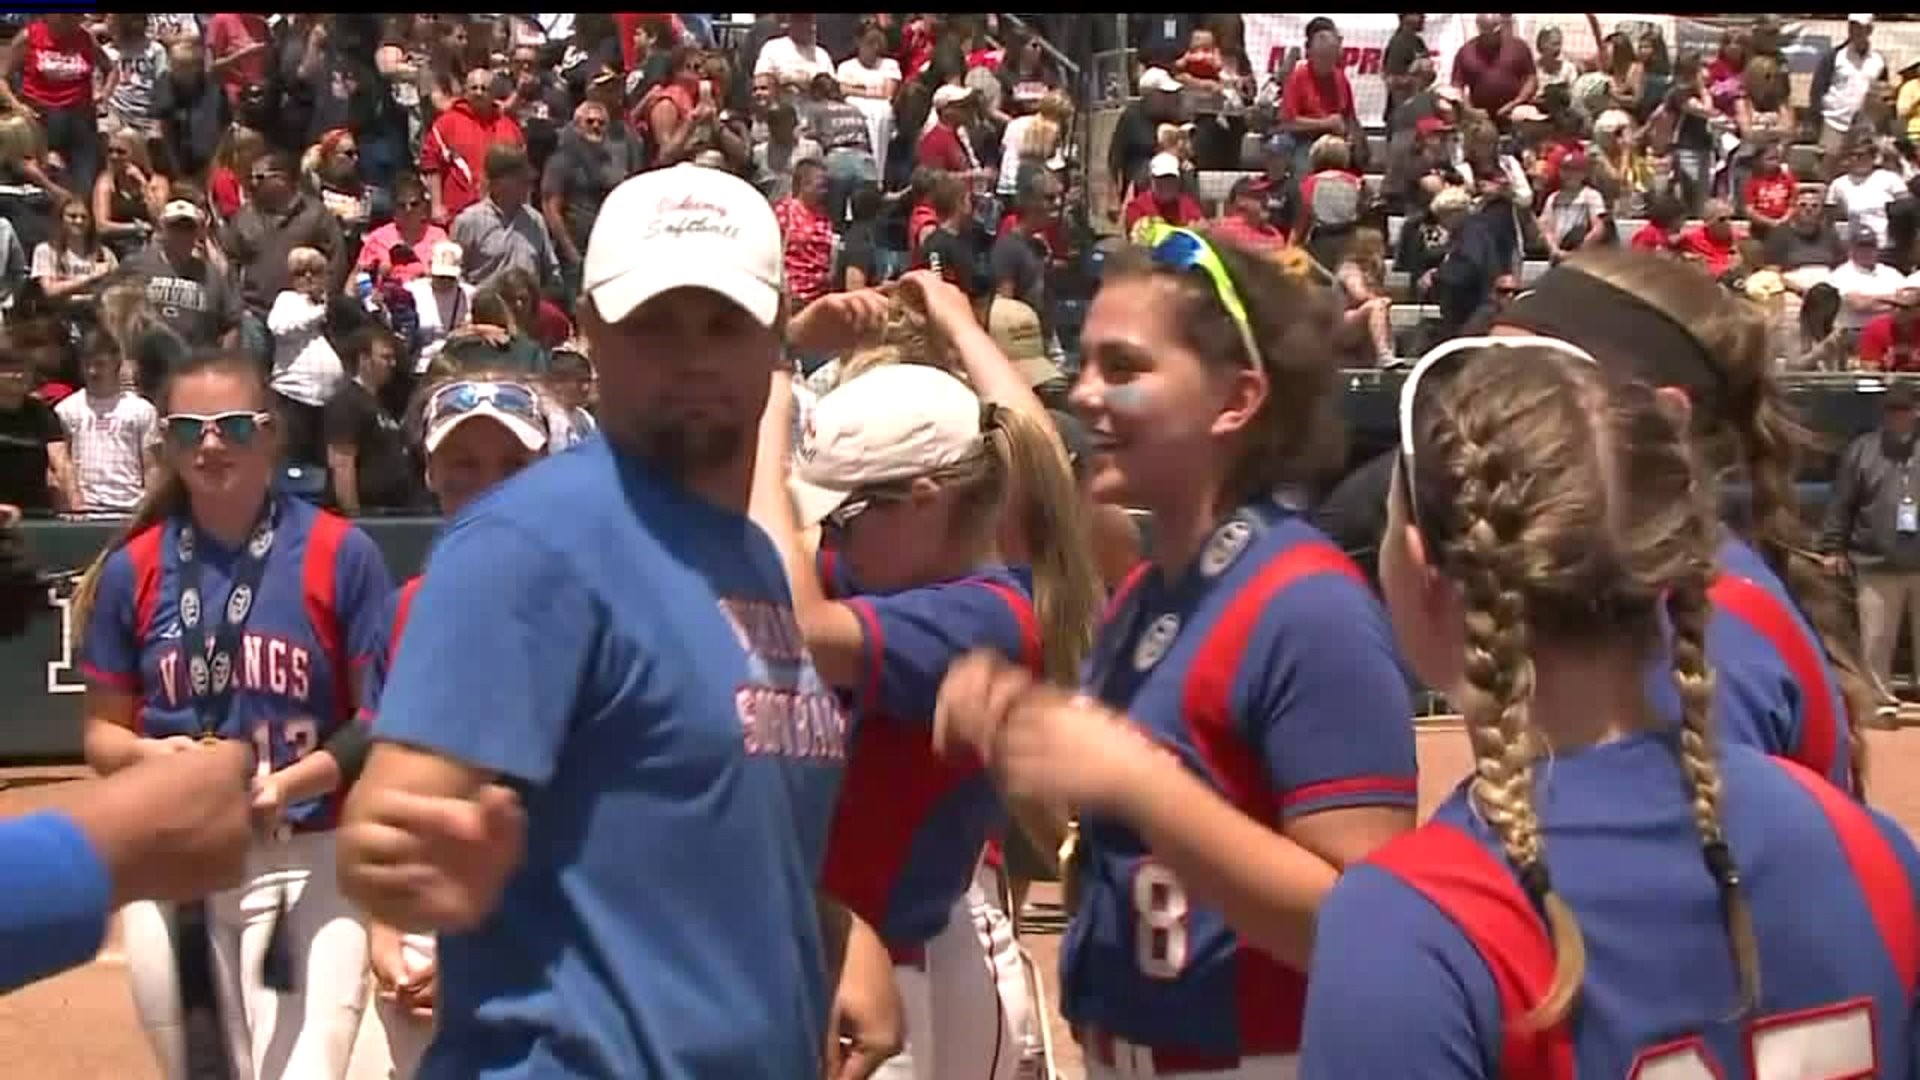 Williams Valley wins 1A PIAA state softball title